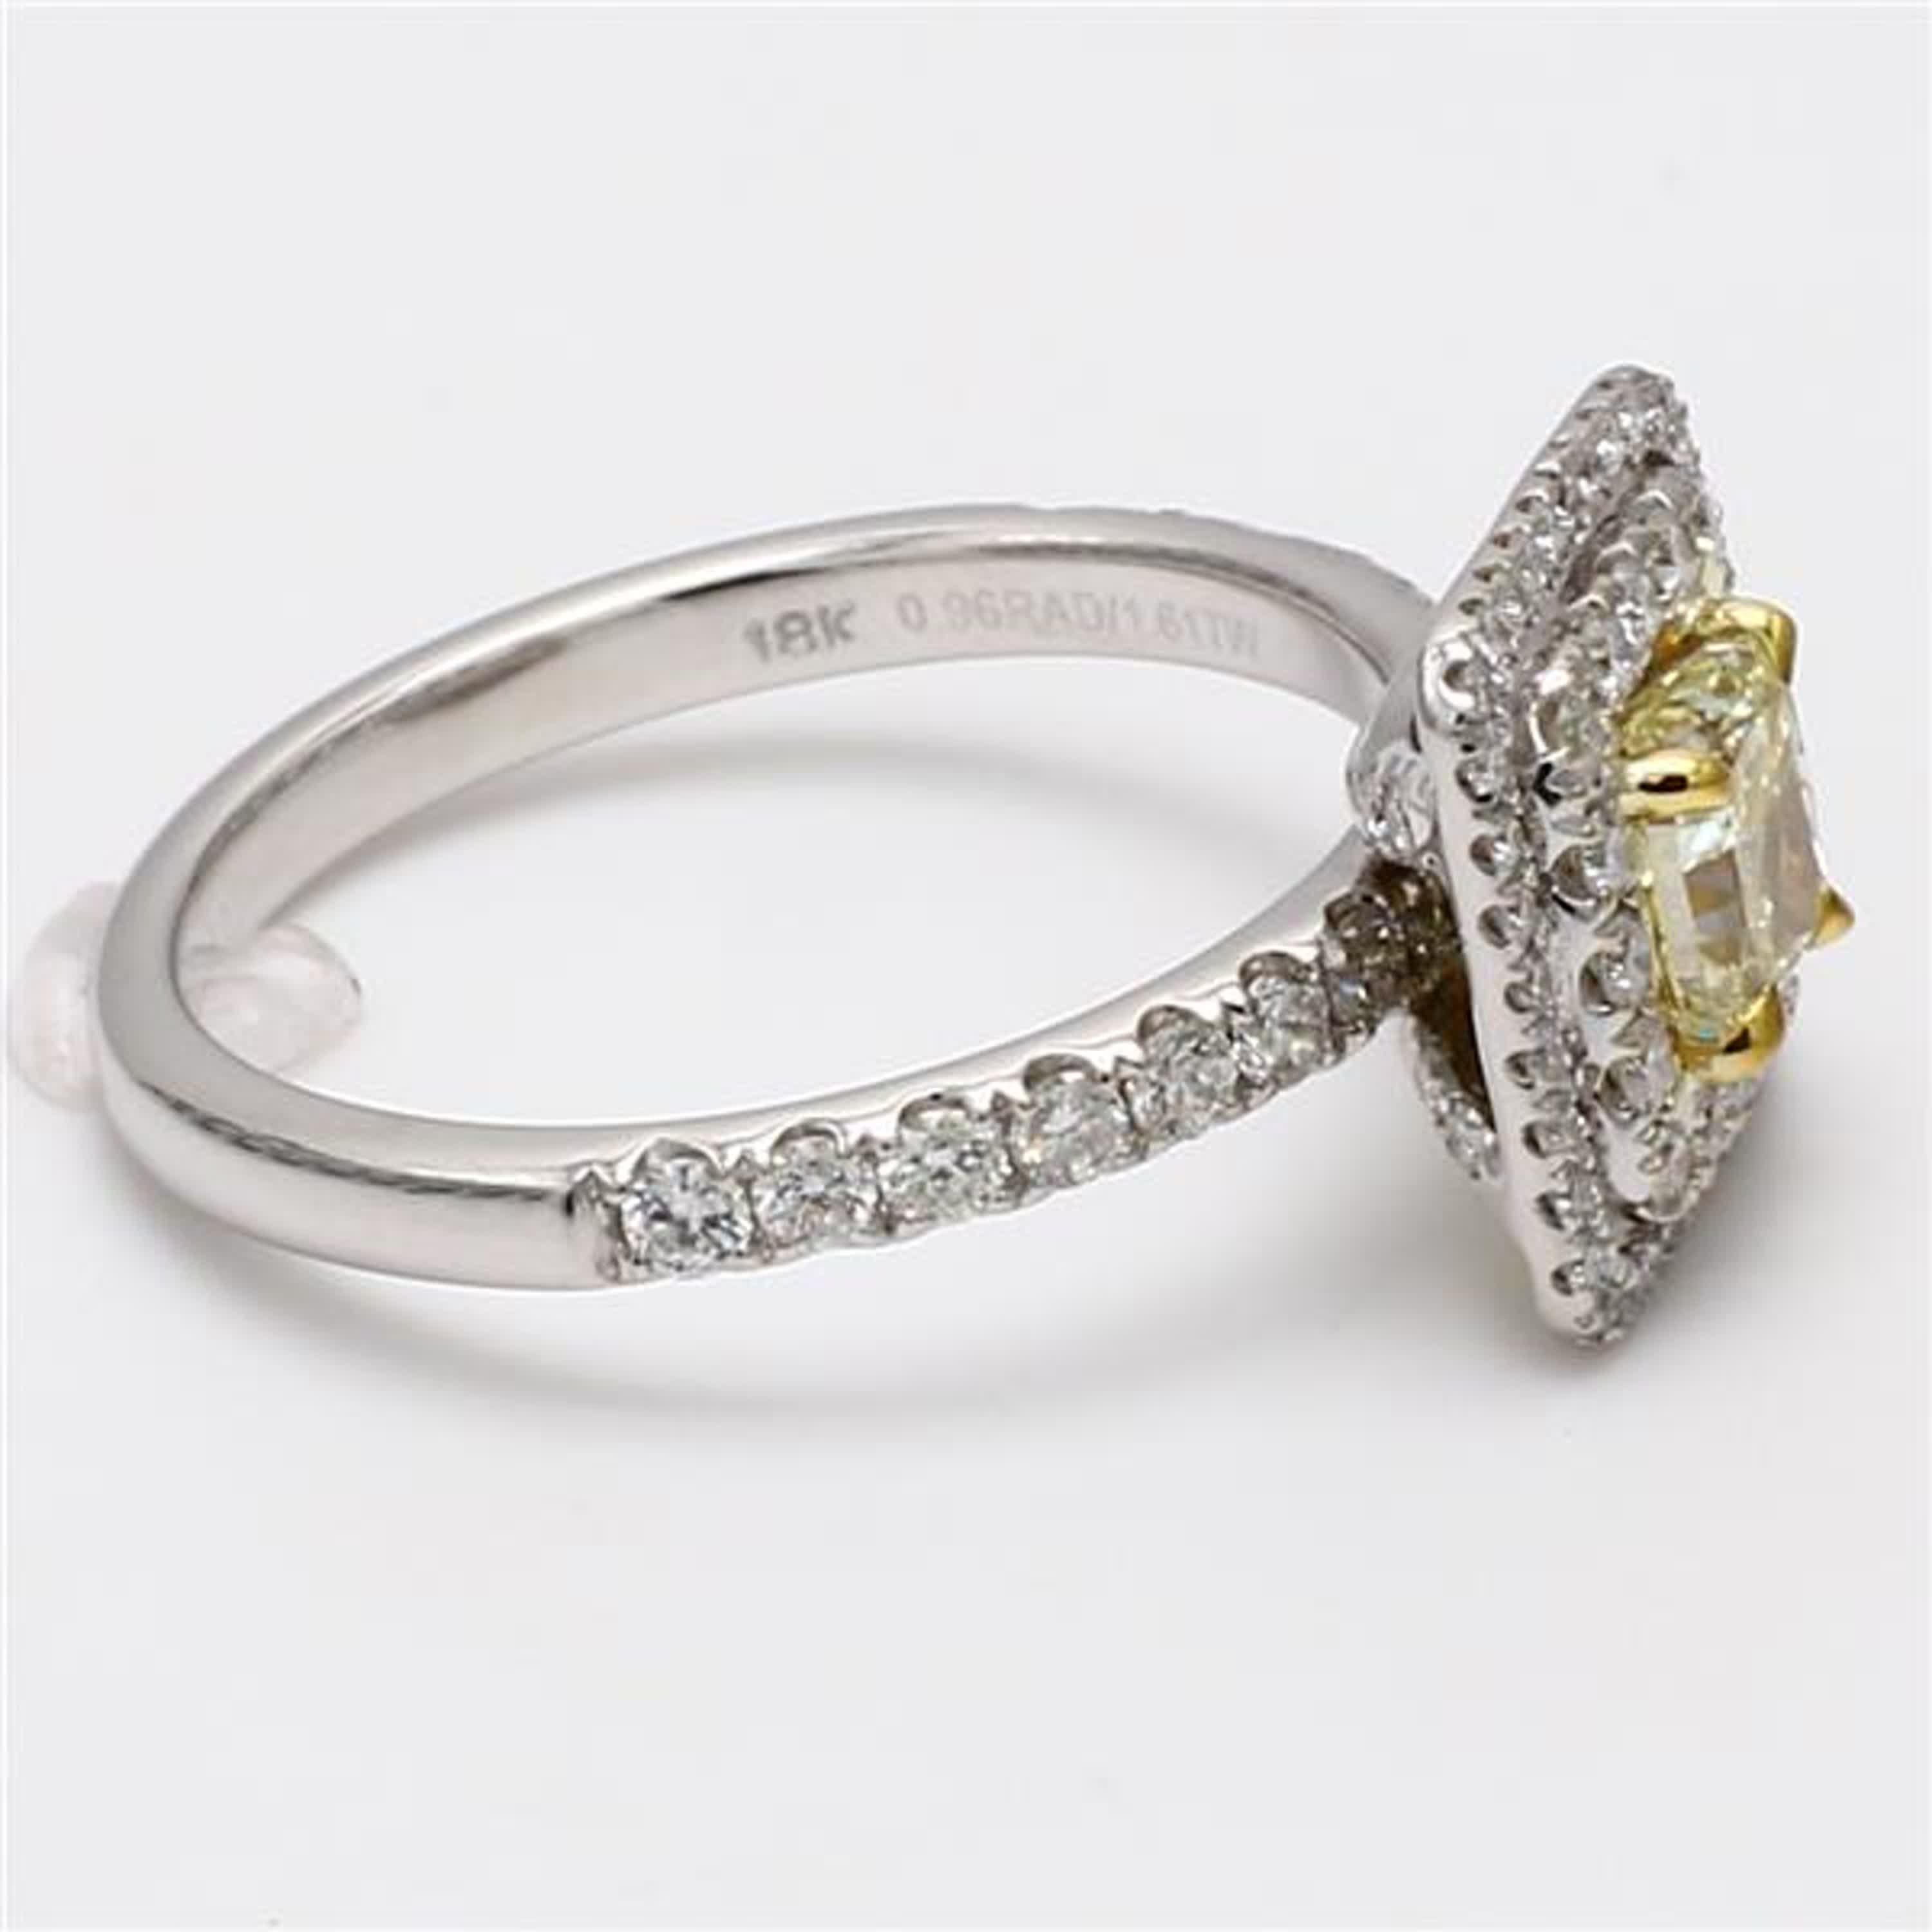 Cushion Cut Natural Yellow Cushion and White Diamond 1.36 Carat TW White Gold Cocktail Ring